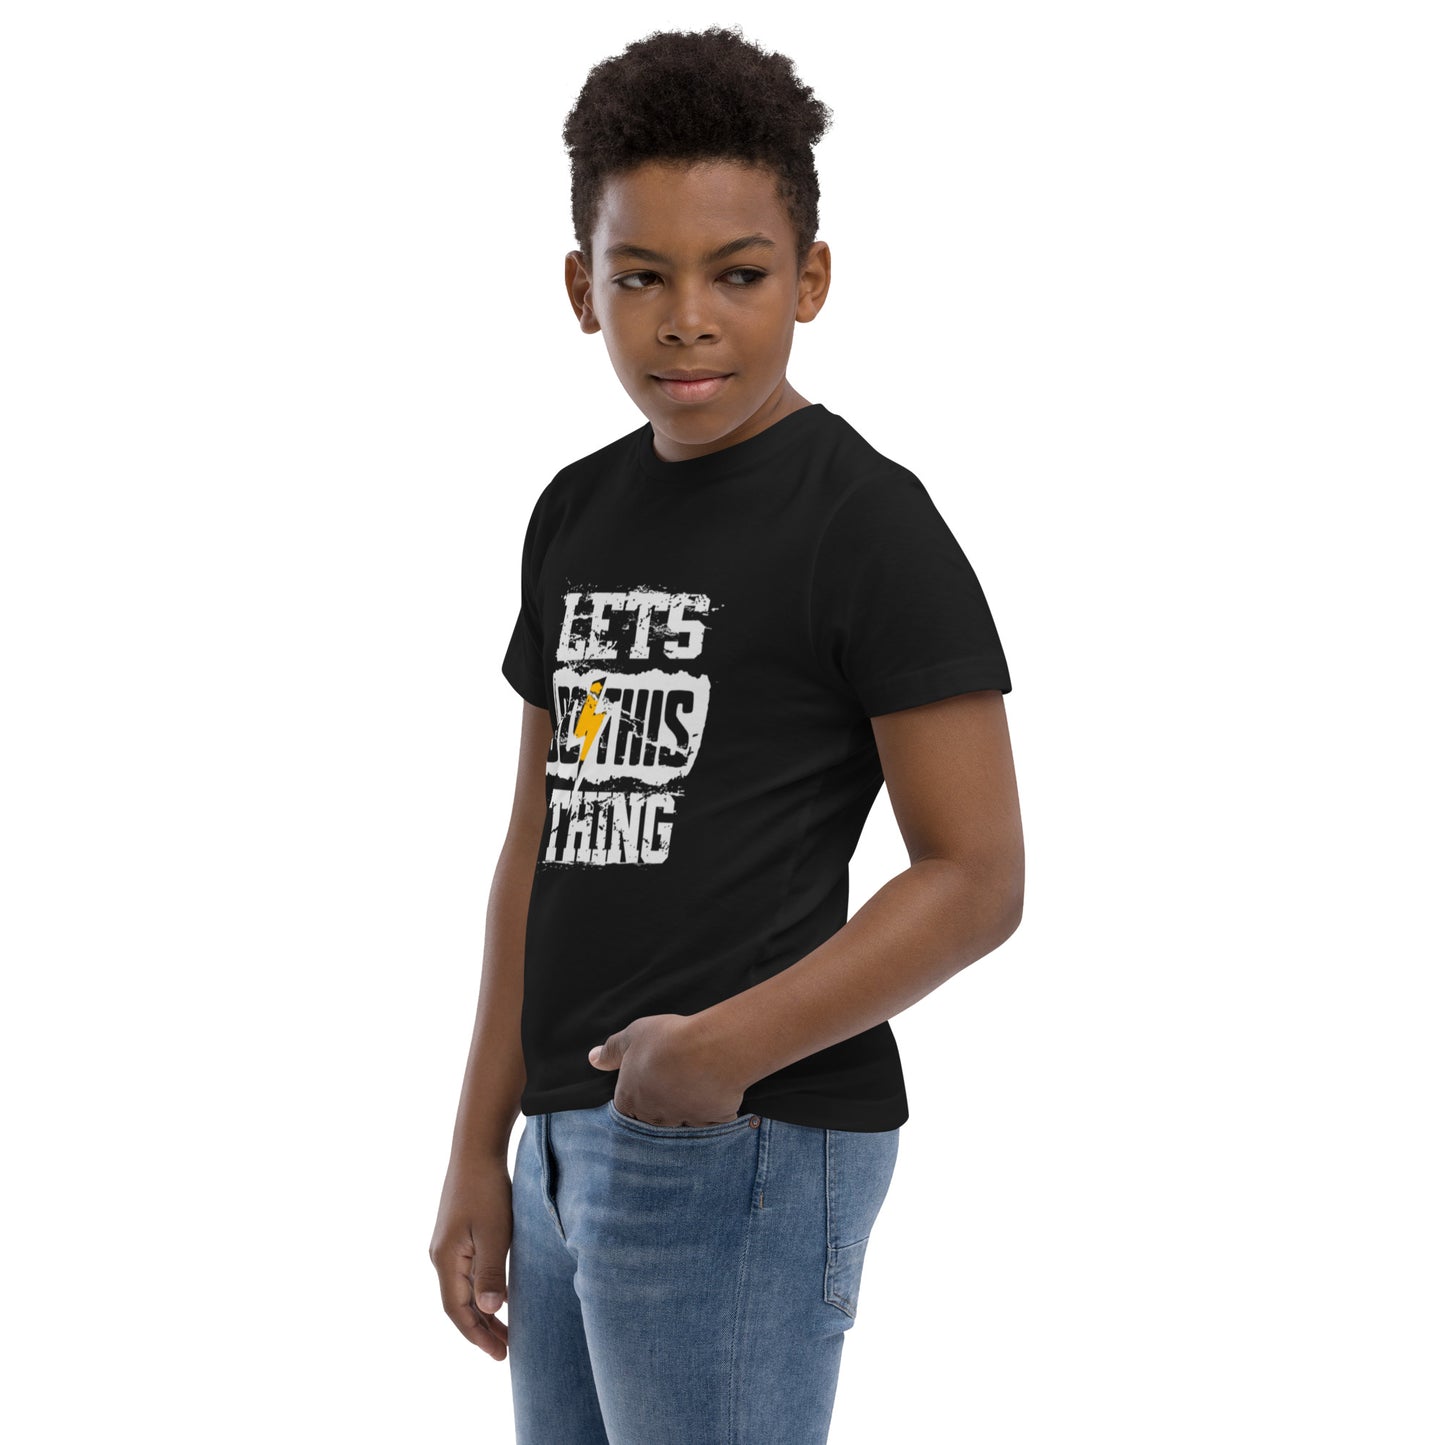 Lets Do This Thing - Youth t-shirt